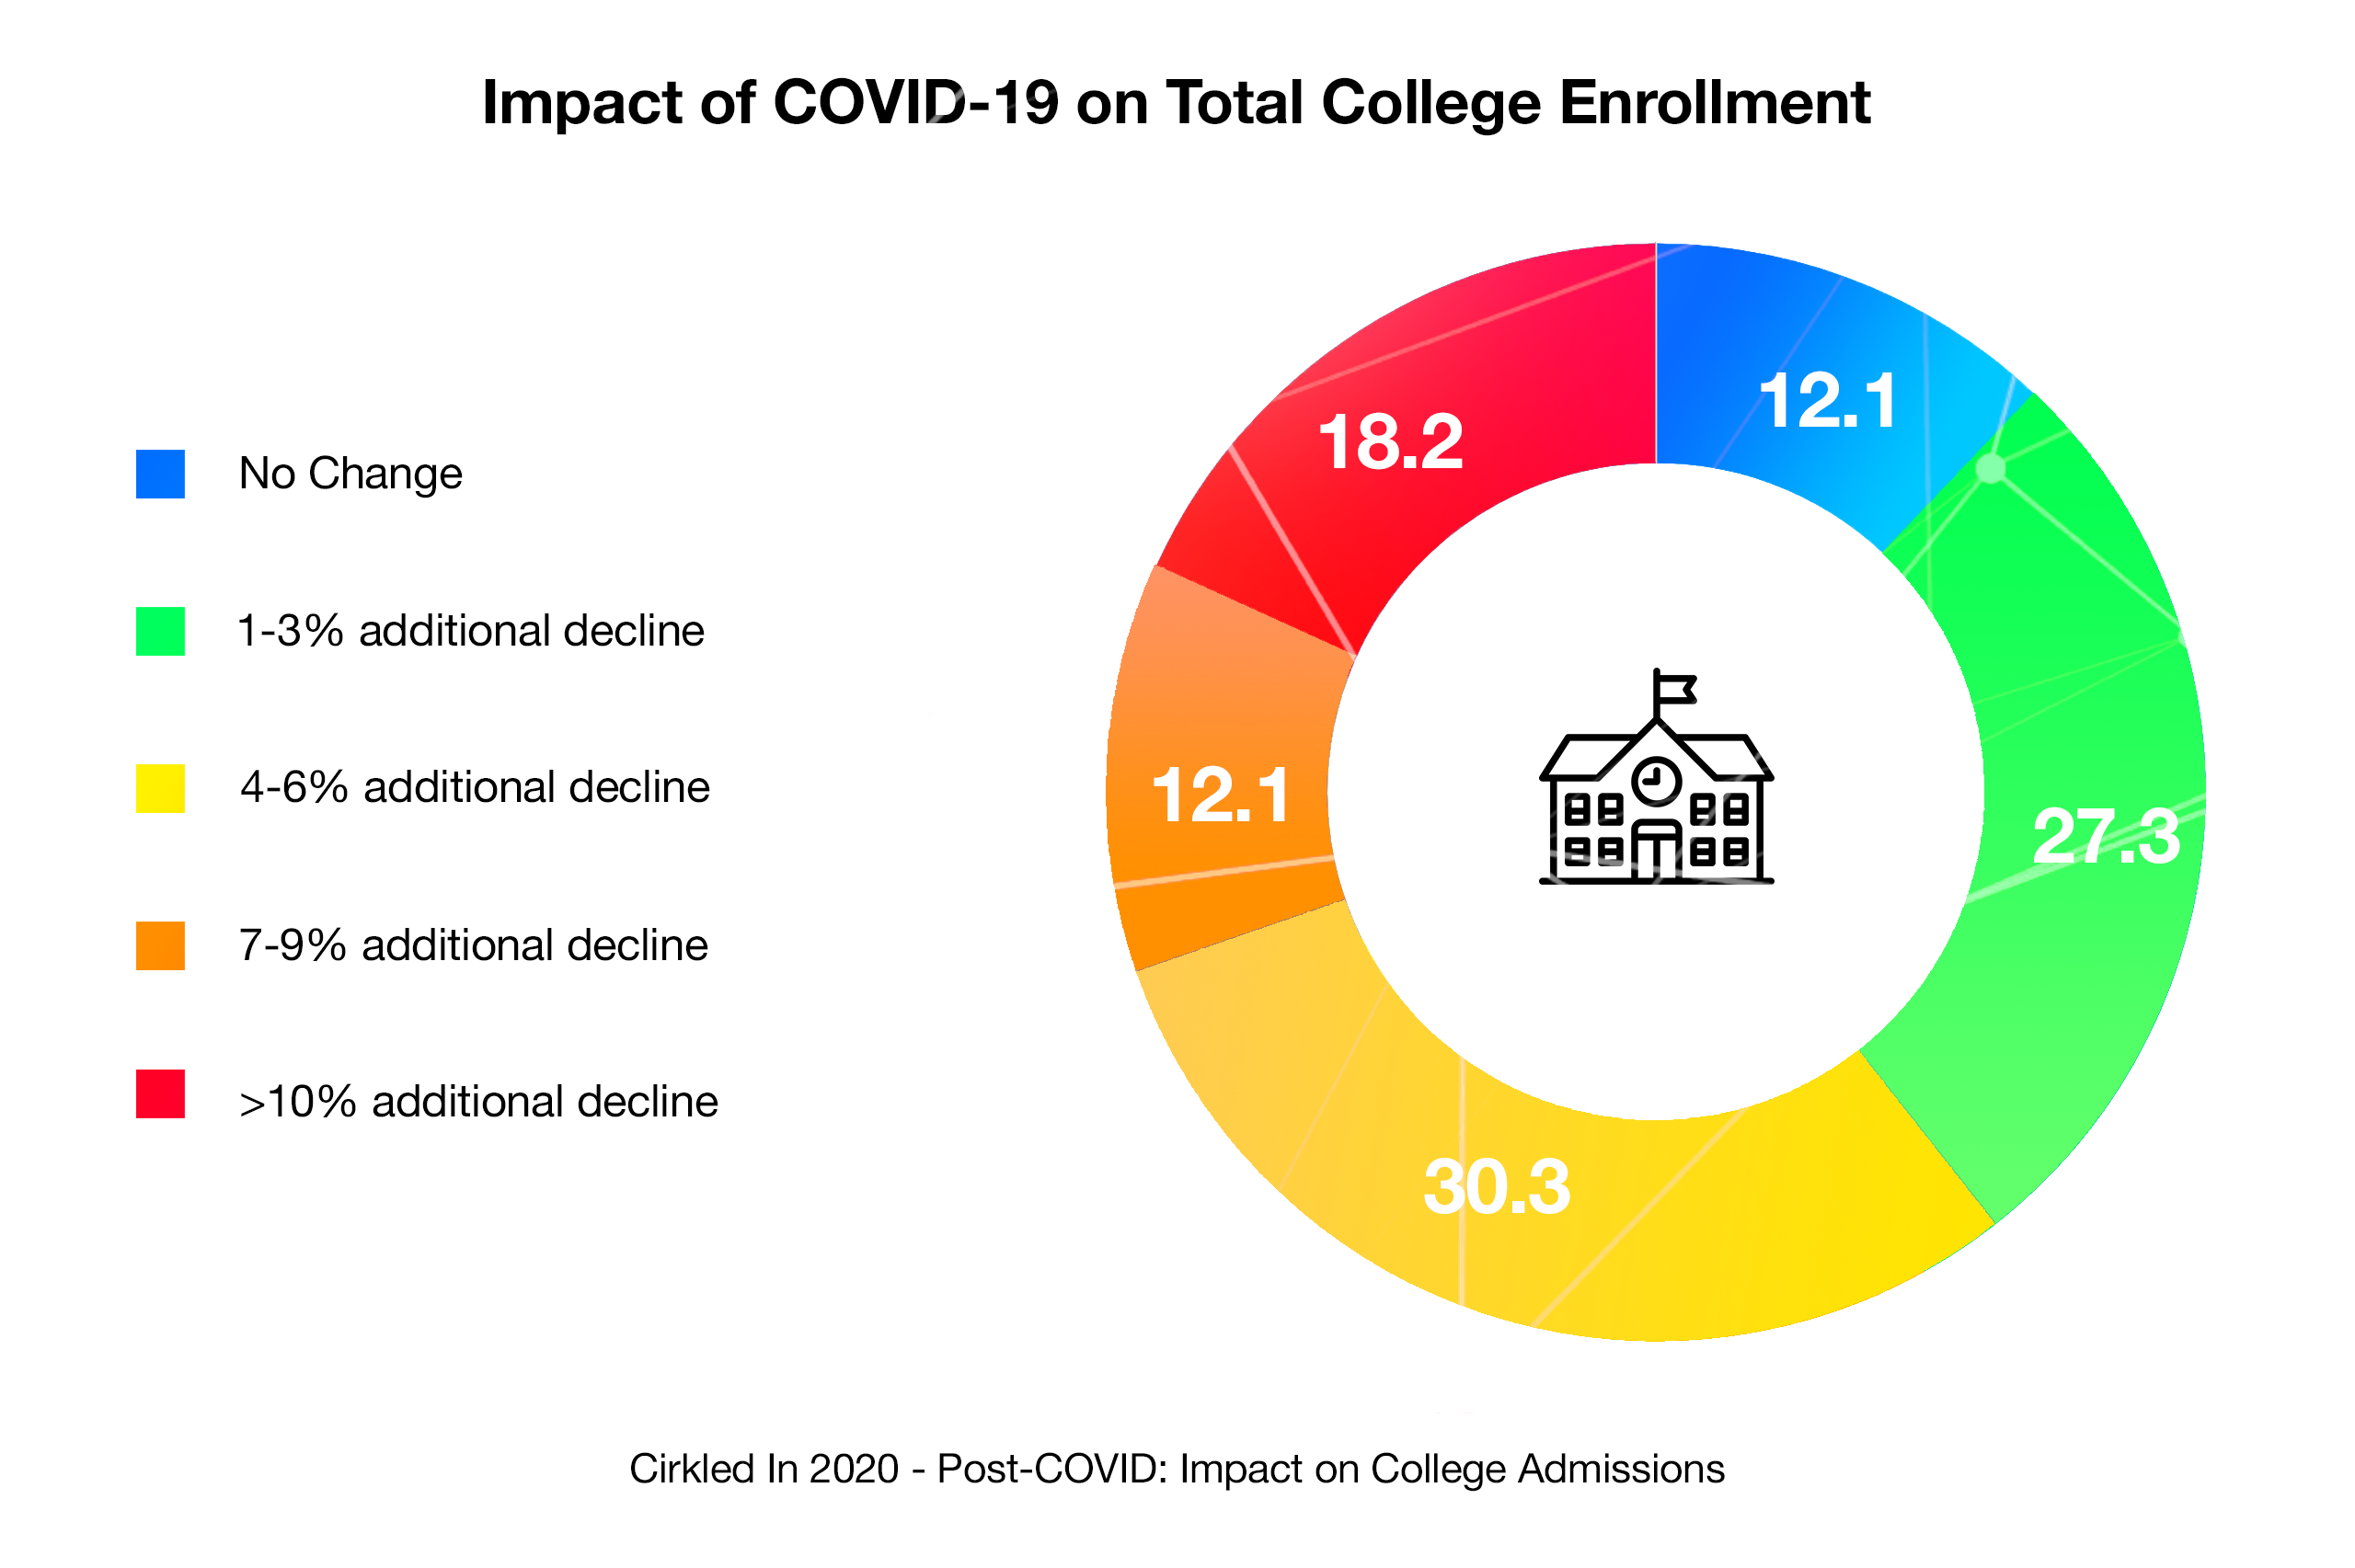 COVID-19: Impact on Total College Enrollment